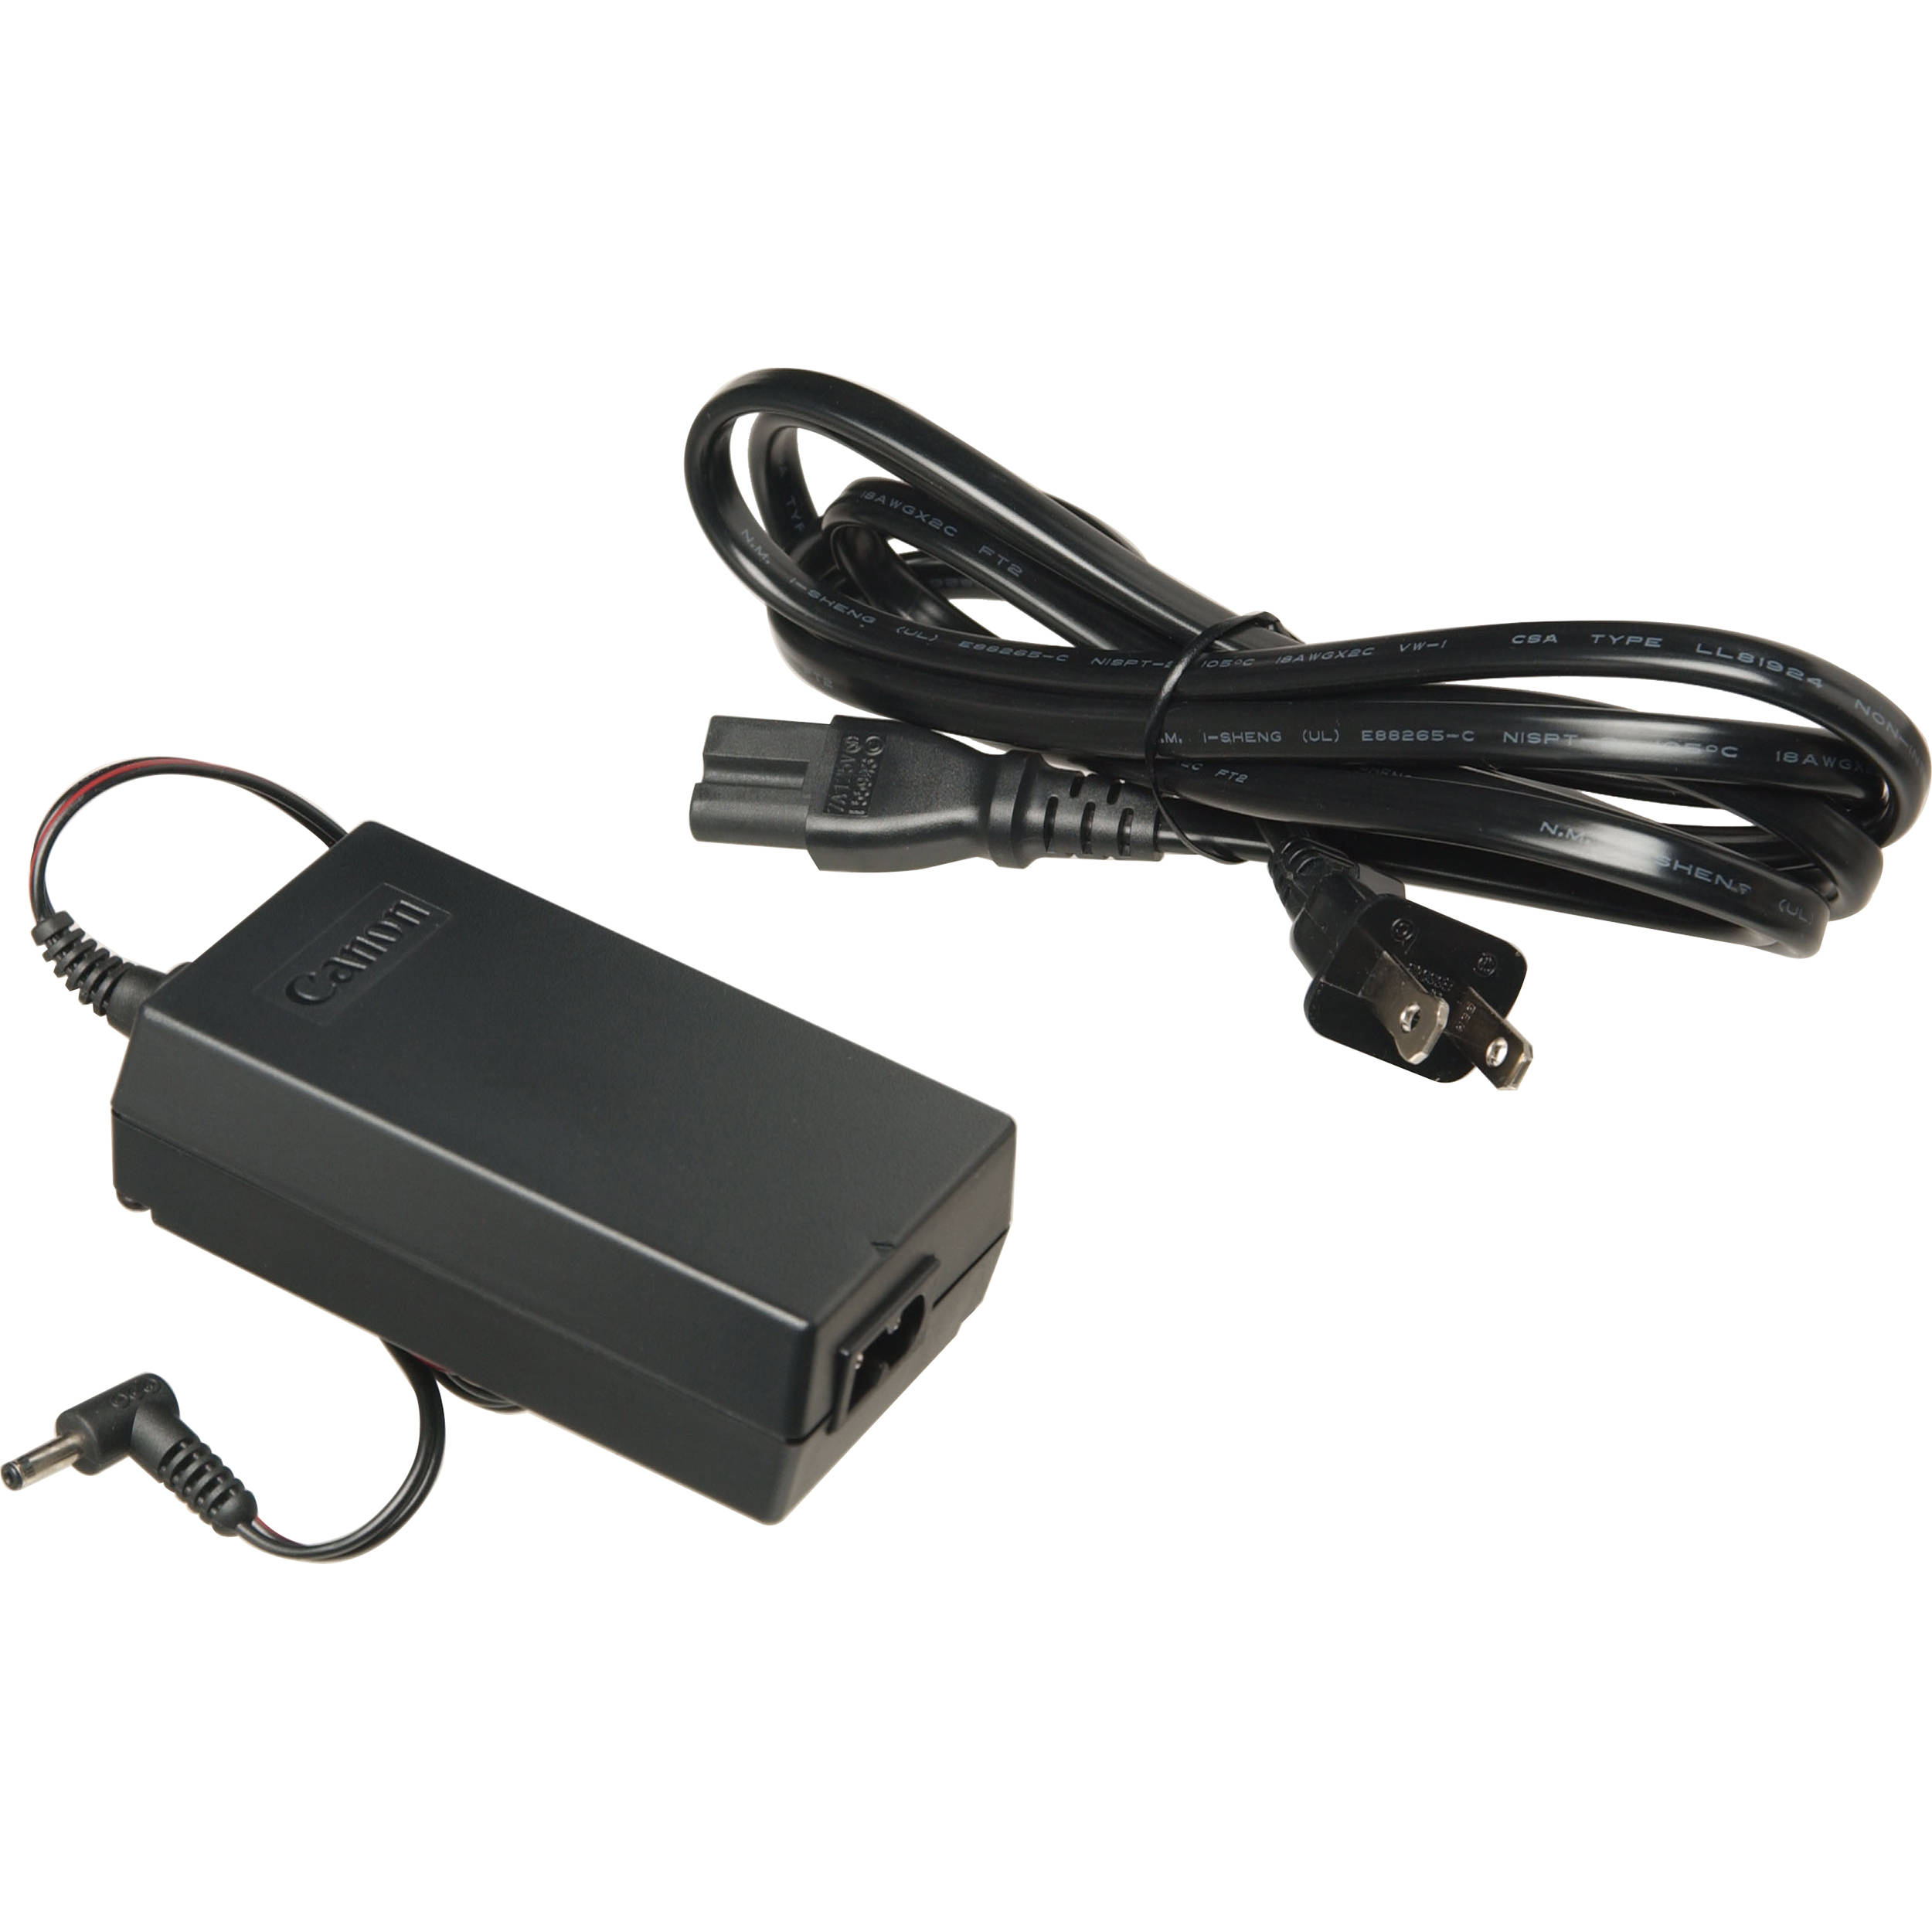 CANON Compact Power Adapter CA-570